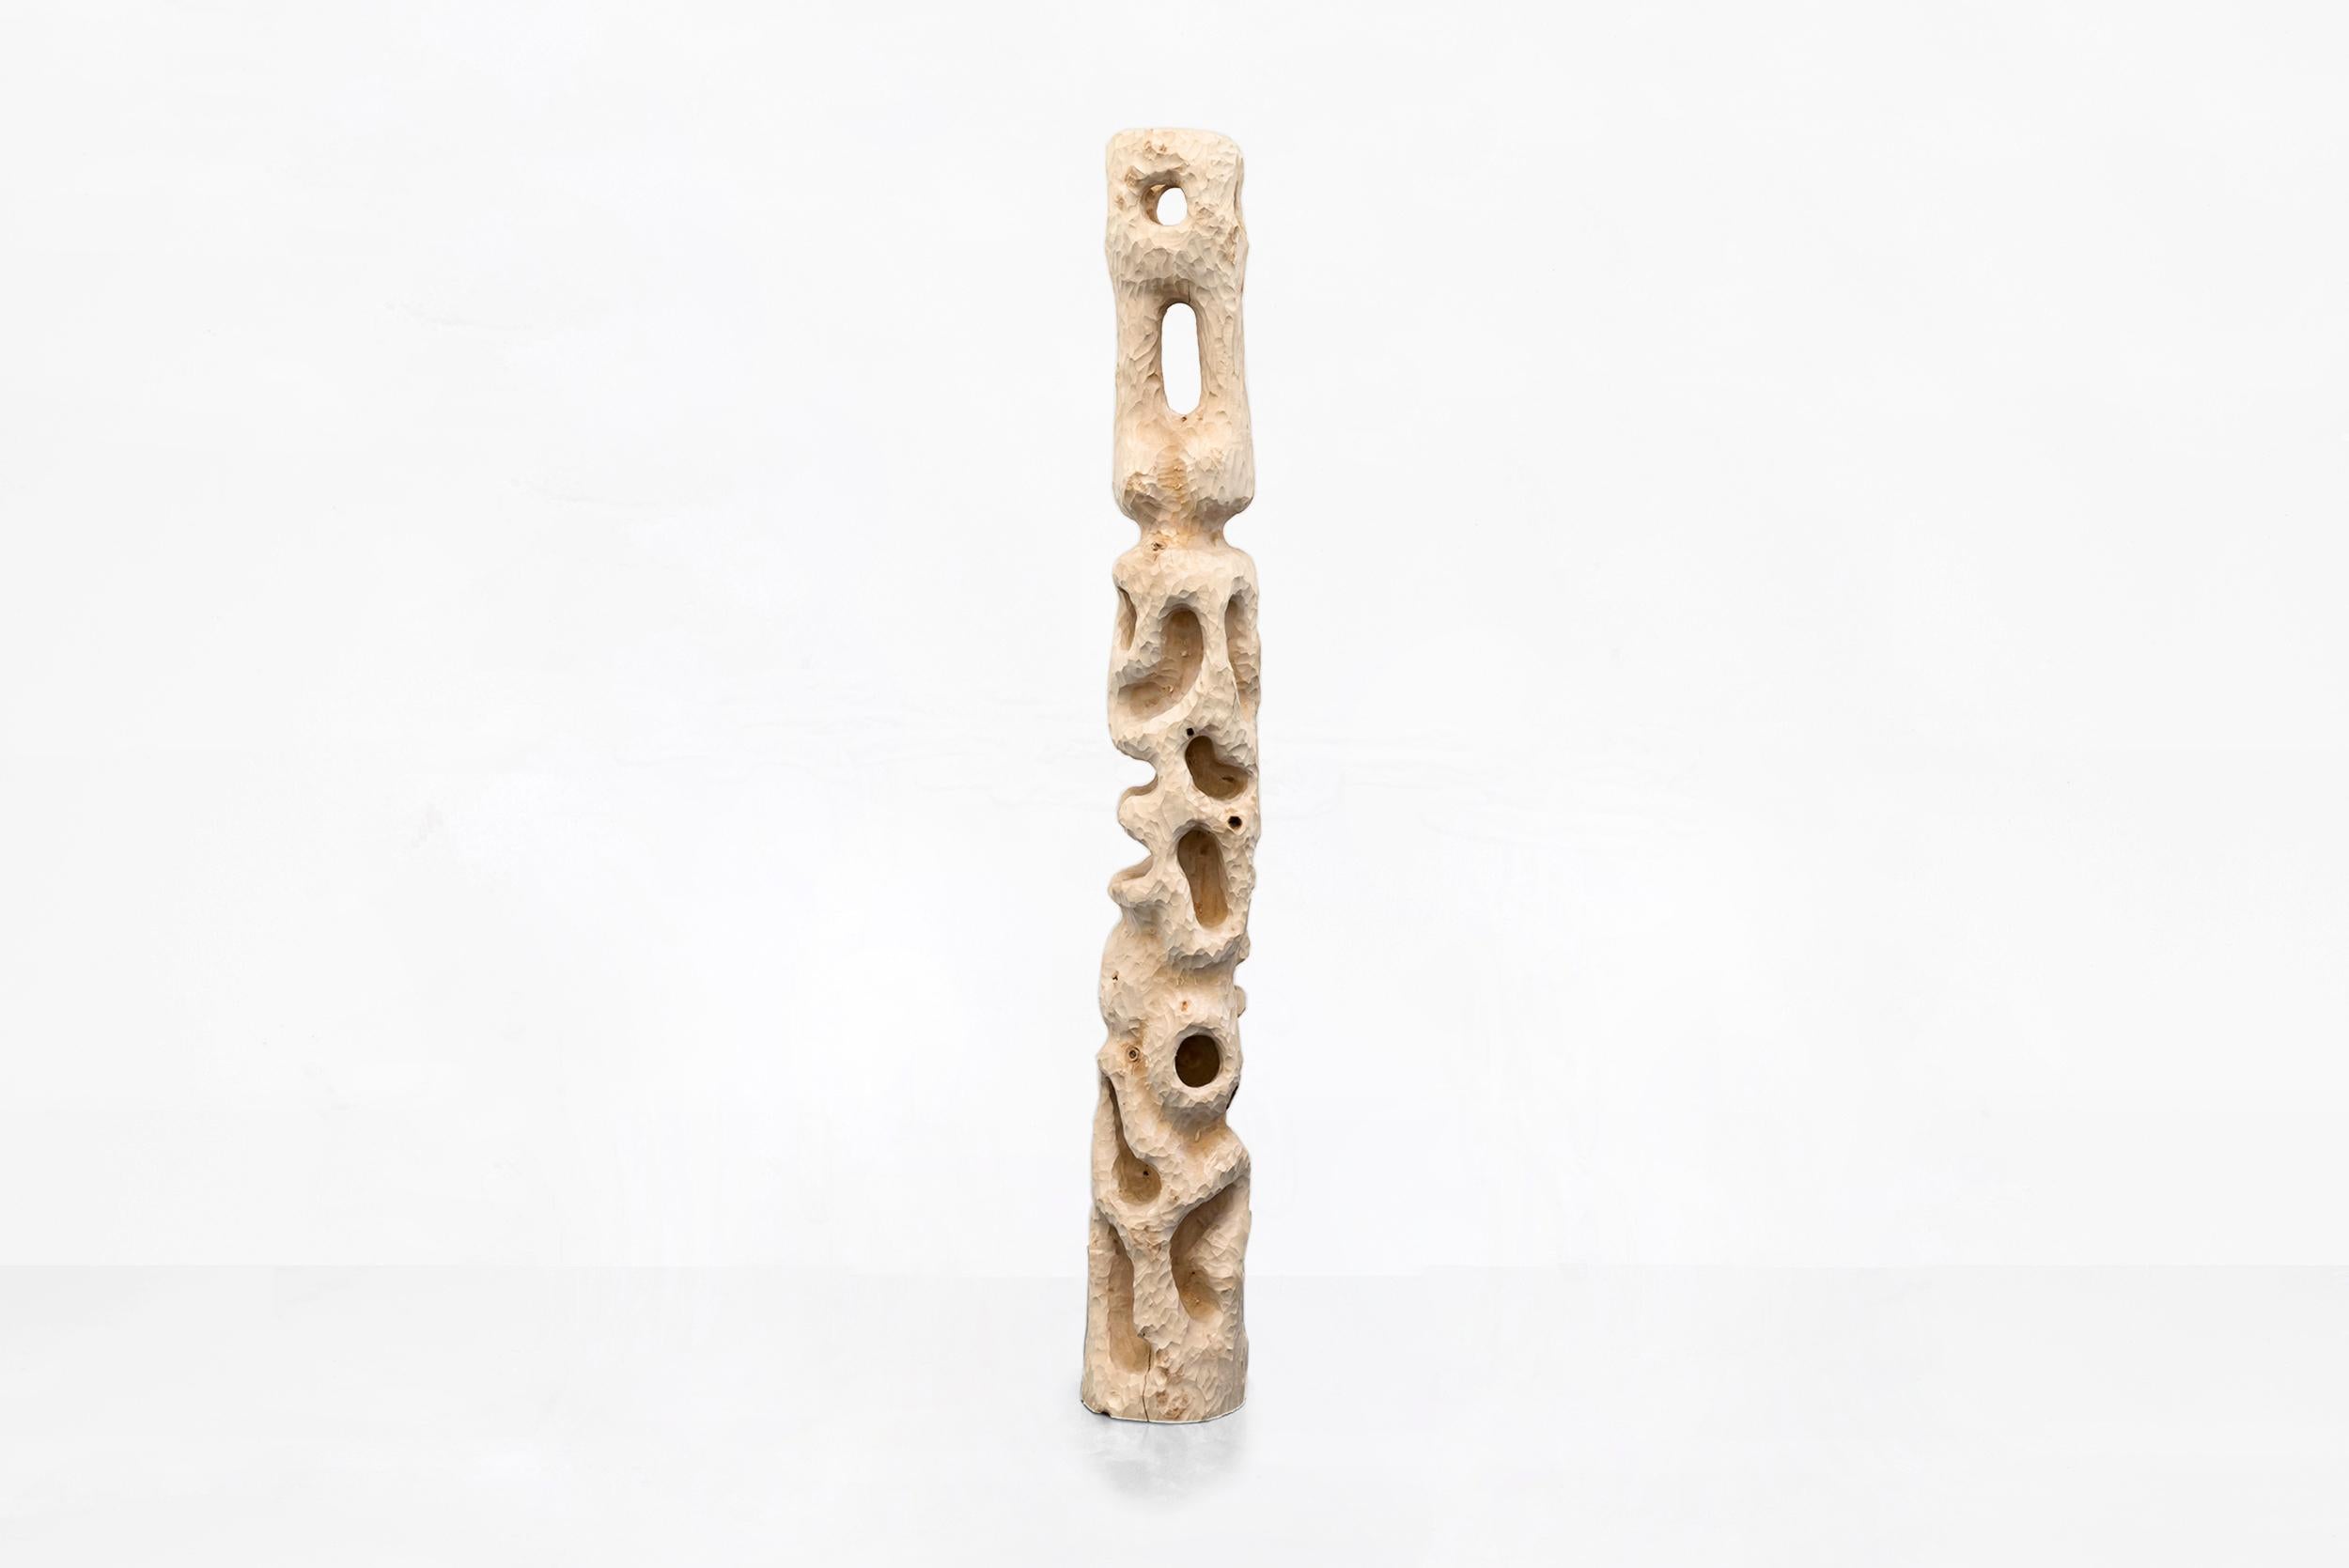 Sigve Knutson
Wood column number 1
Manufactured by Sigve Knutson
Oslo, Norway, 2019
Wood, birch
Produced exclusively for Side Gallery Barcelona 

Measurements
17 cm x 17 cm x 140 H cm
6.69 in x 6.69 in x 55.11 H in

Edition
Unique